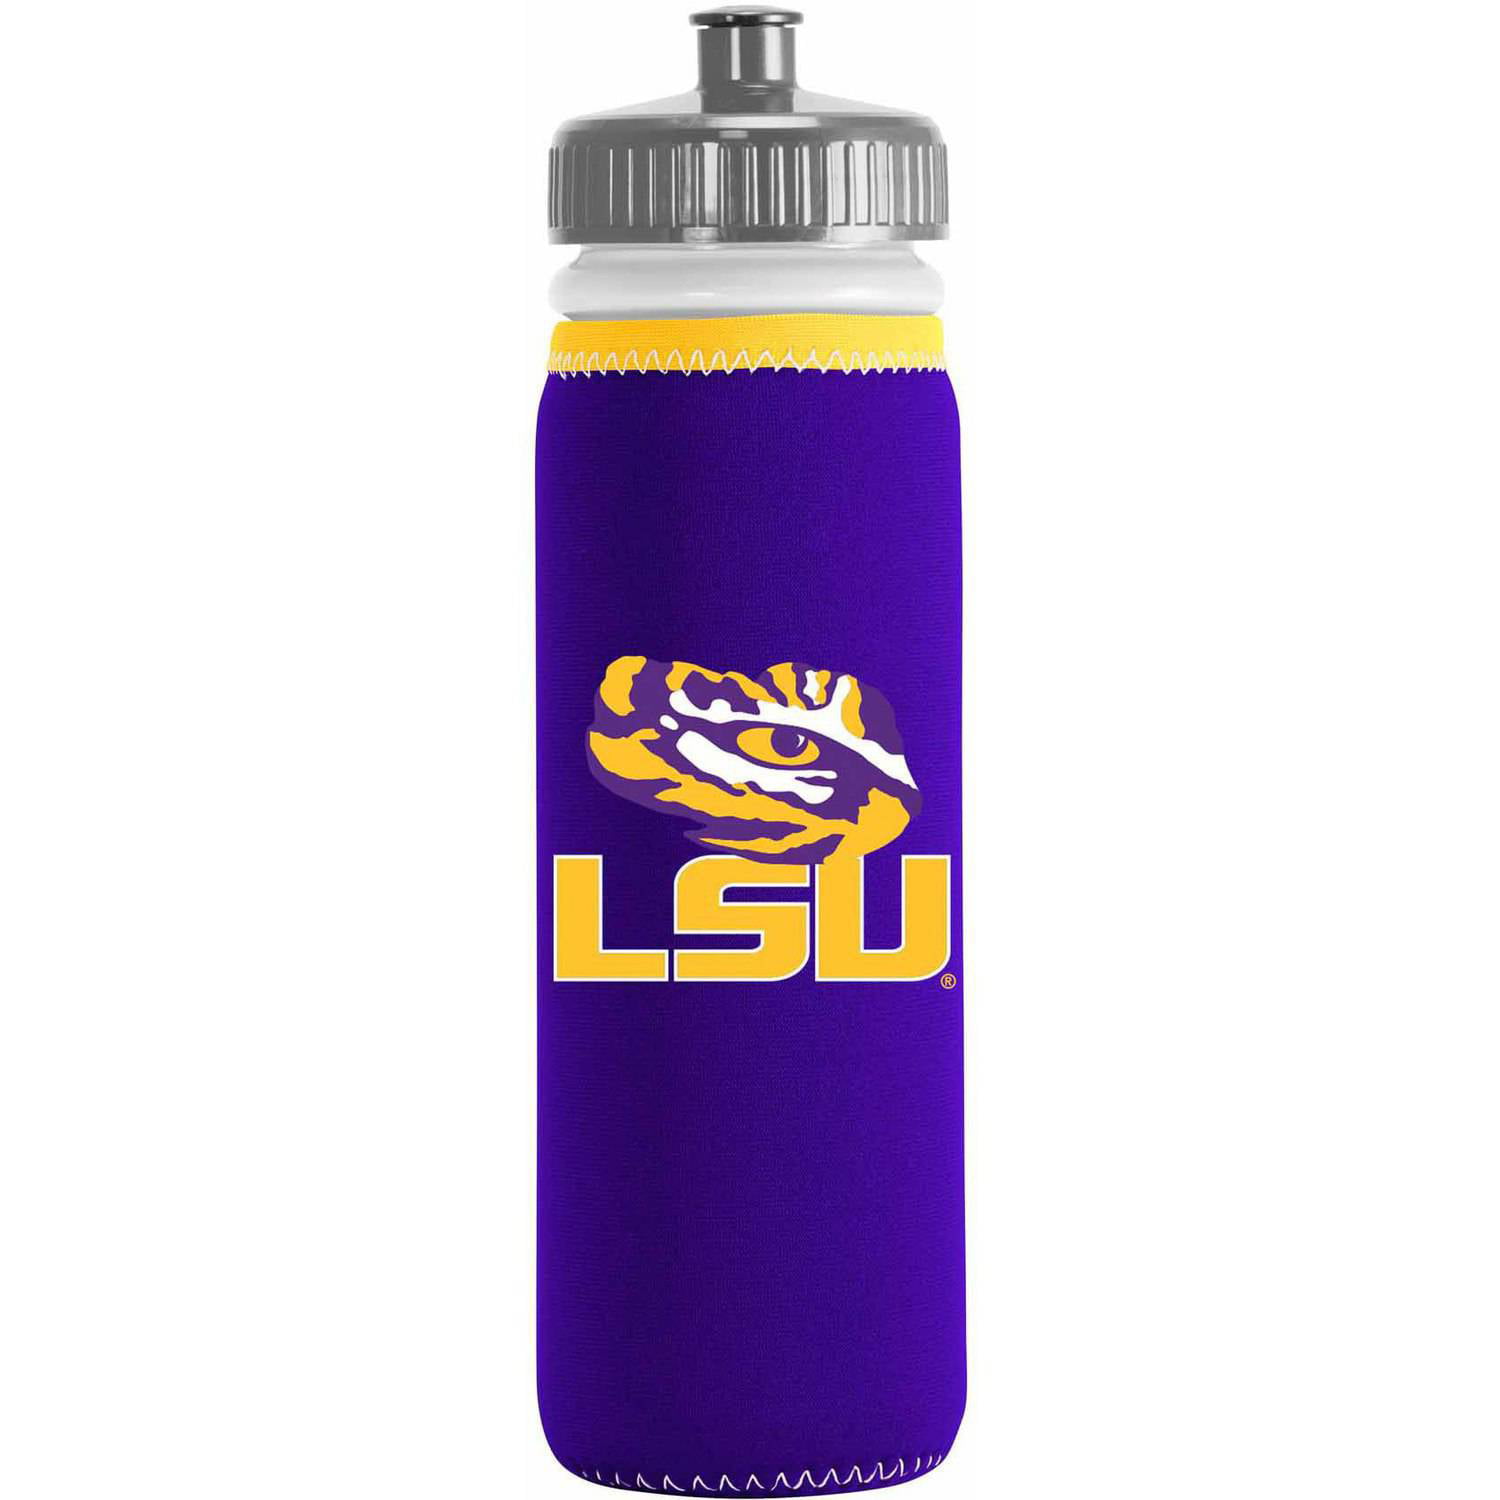 LSU TIGERS FOLDABLE WATER BOTTLE GREAT FOR GAMEDAY! 